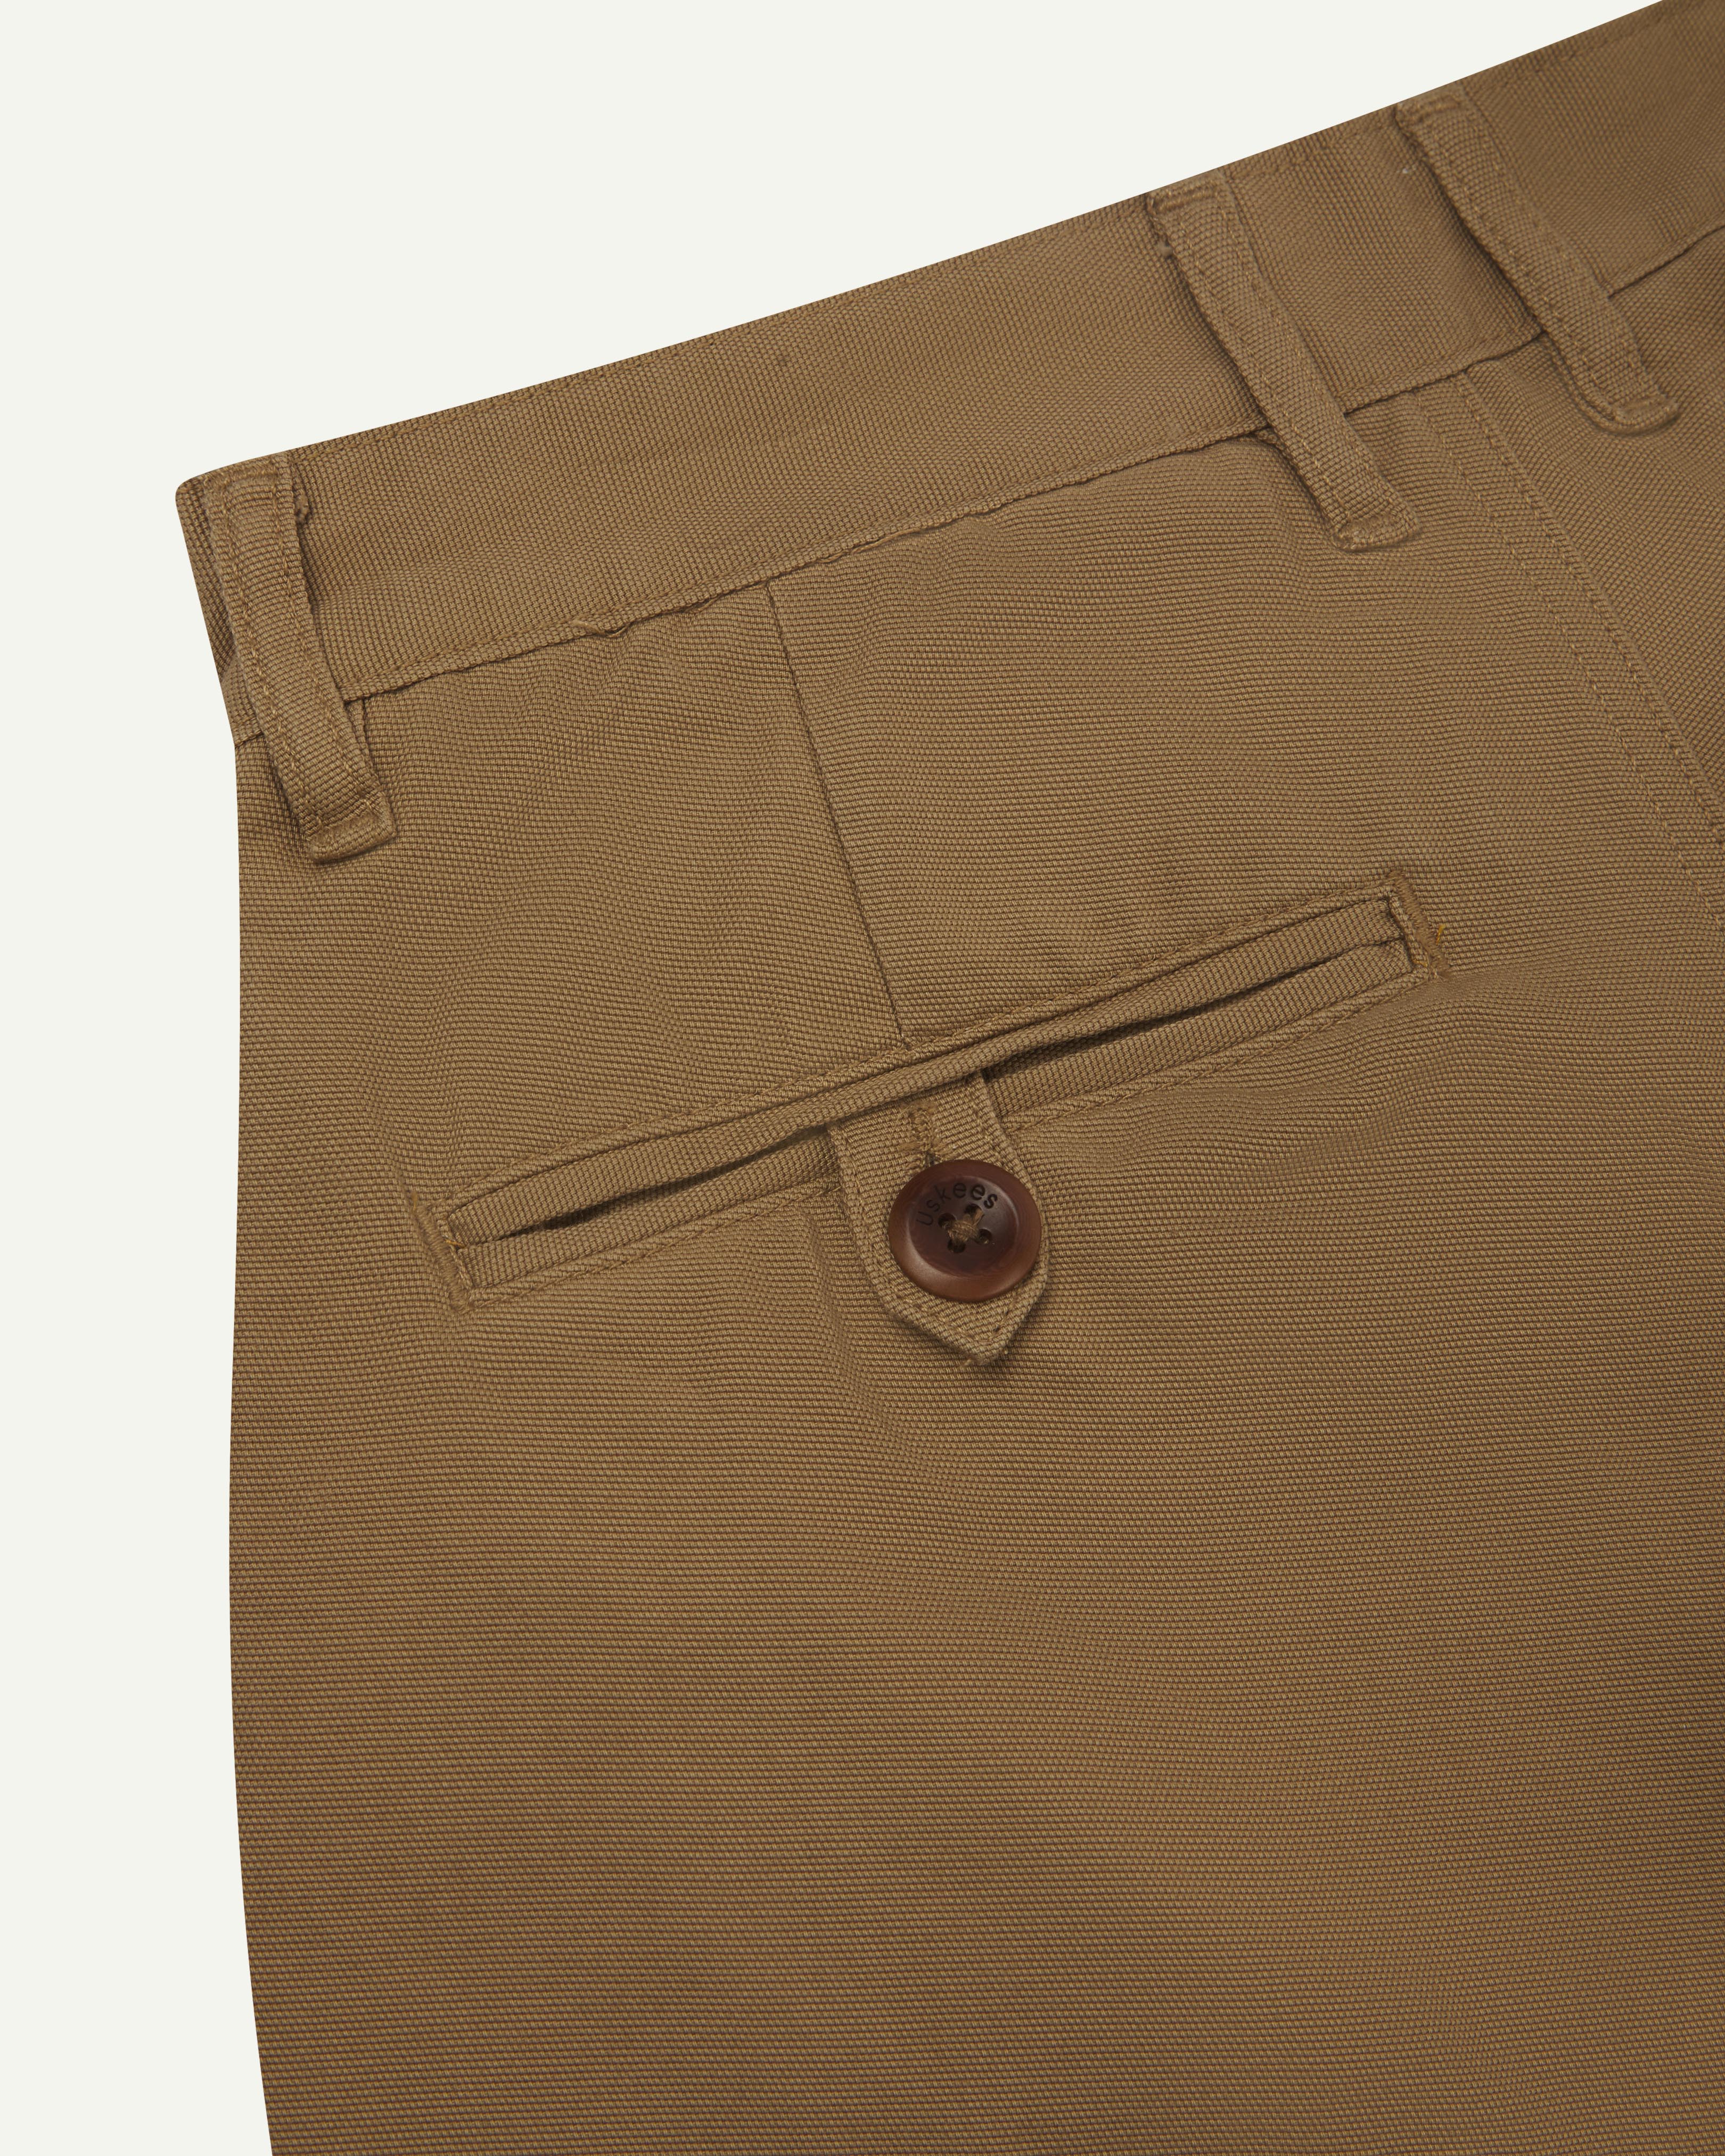 Back close up shot of #5018 Uskees men's organic mid-weight cotton boat trousers in khaki showing waistband with belt loops and buttoned back pocket.